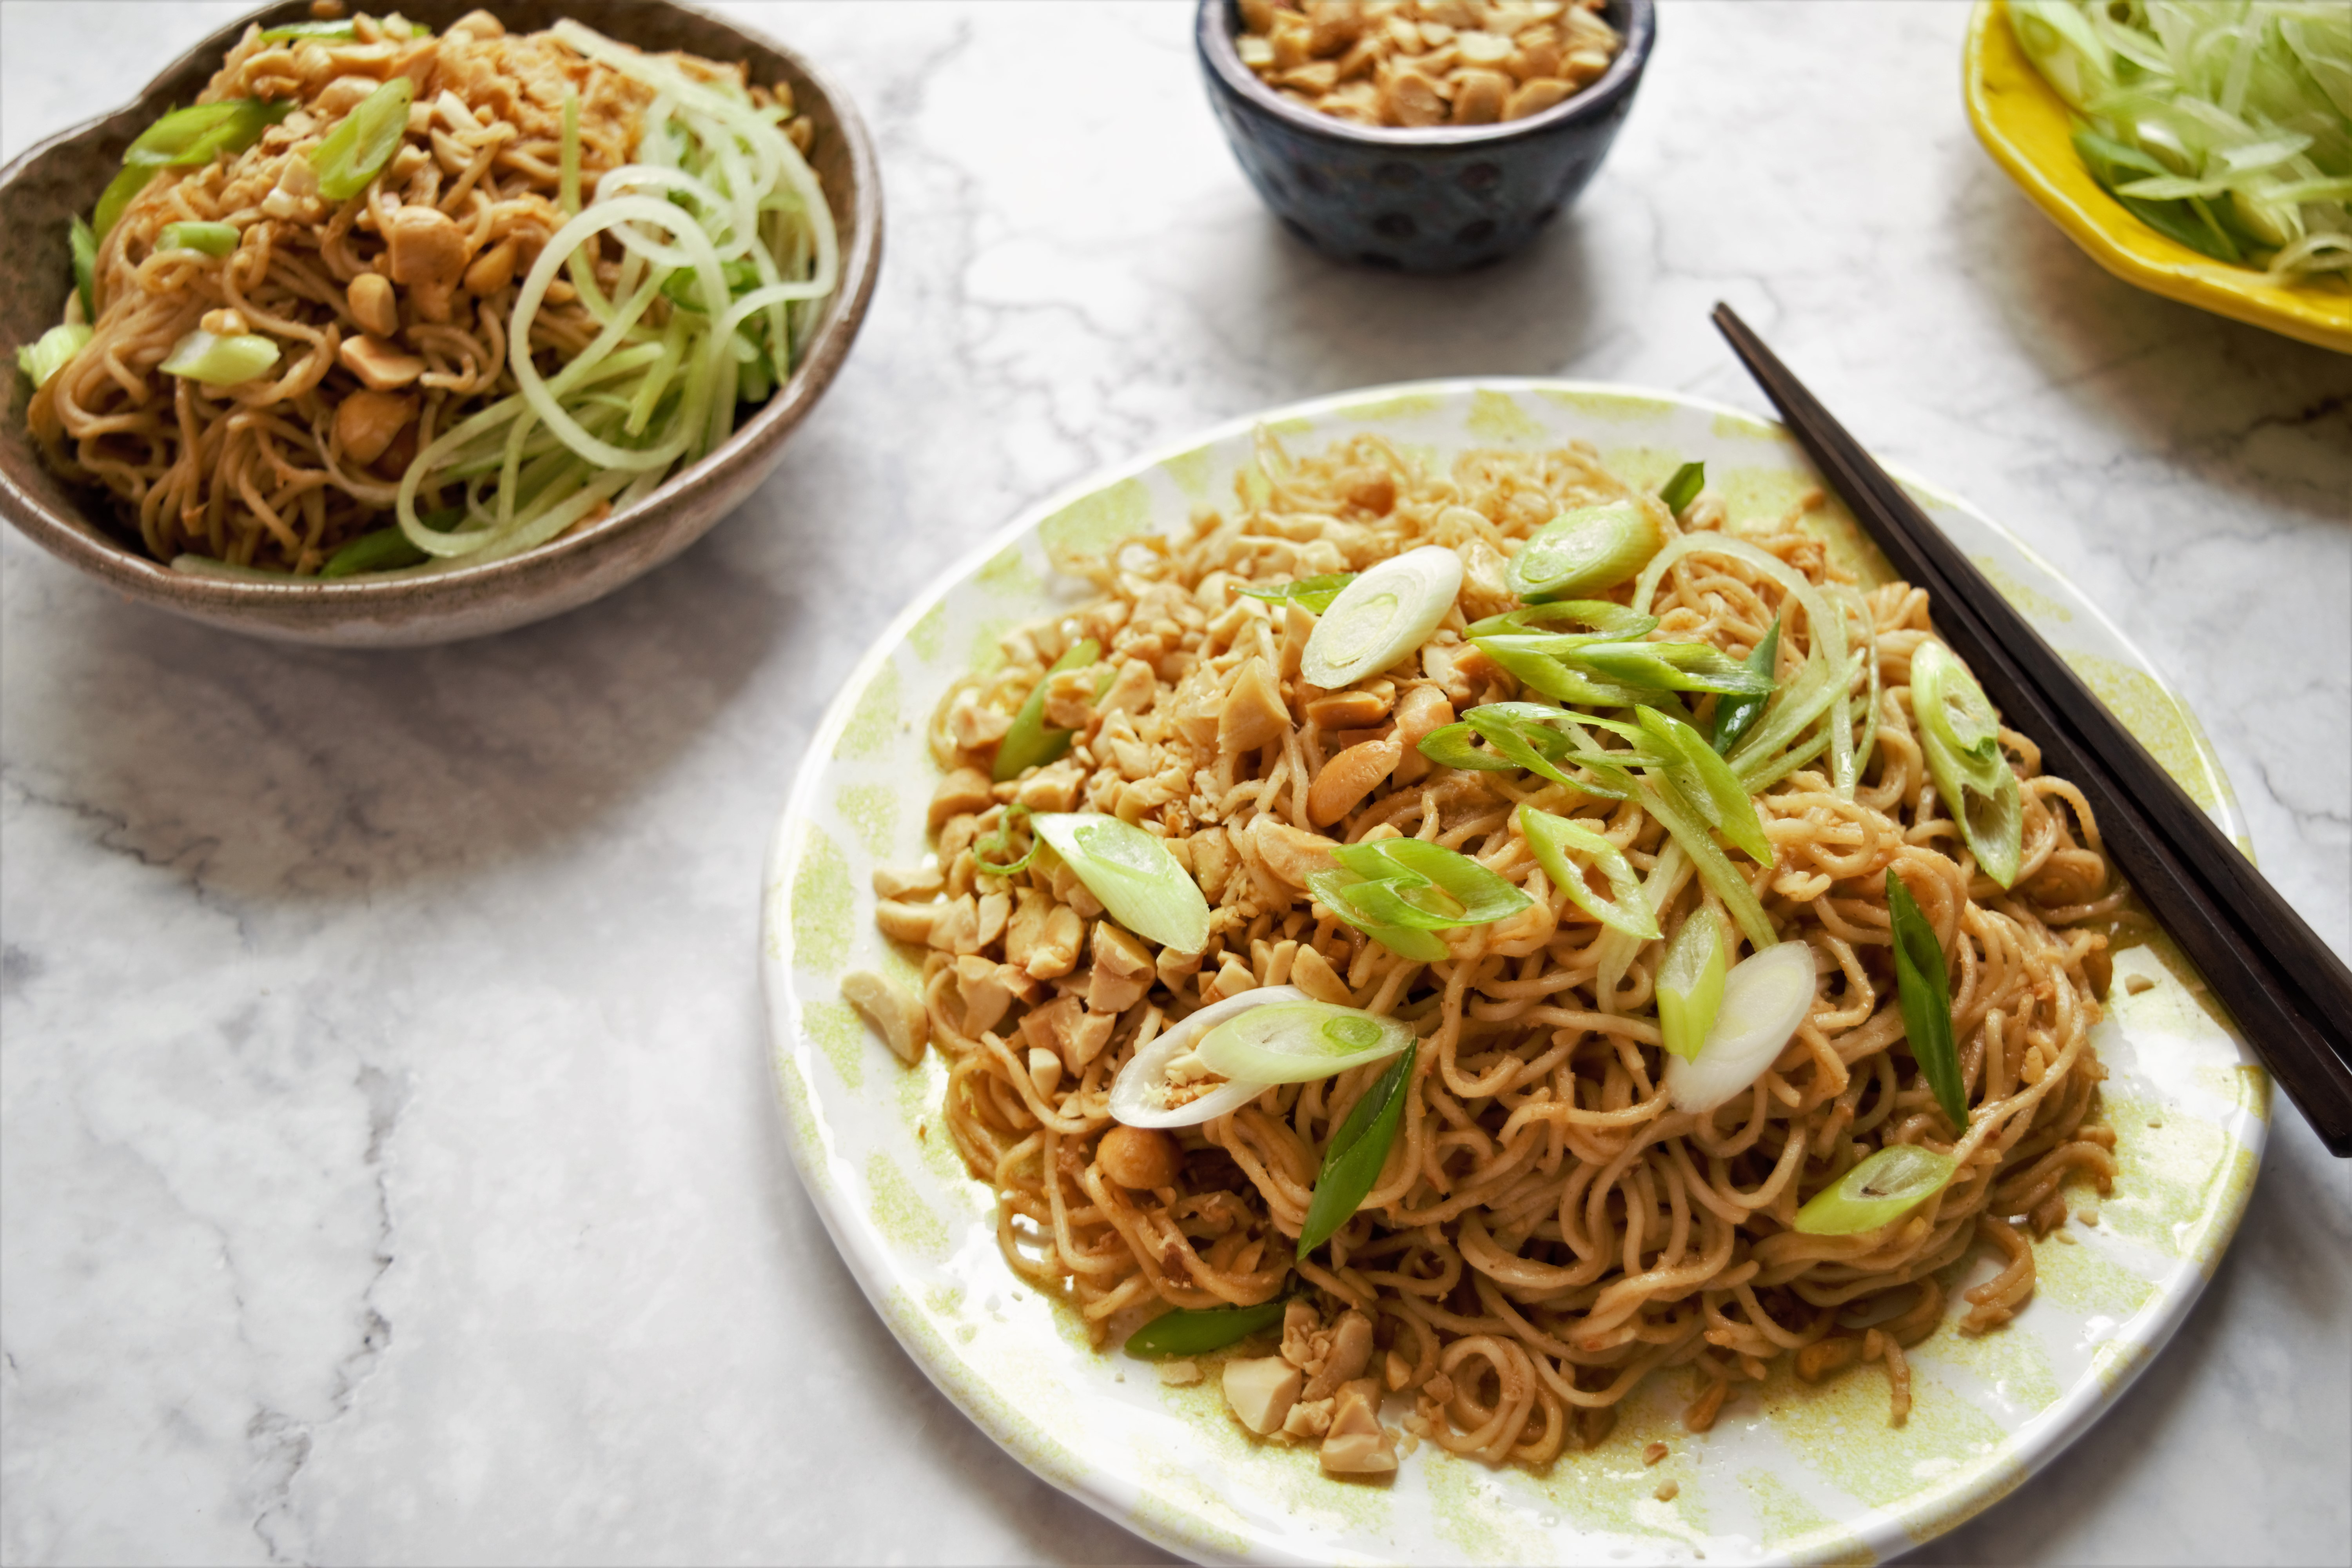 You are currently viewing Vegan Takeout-Style Sesame Noodles